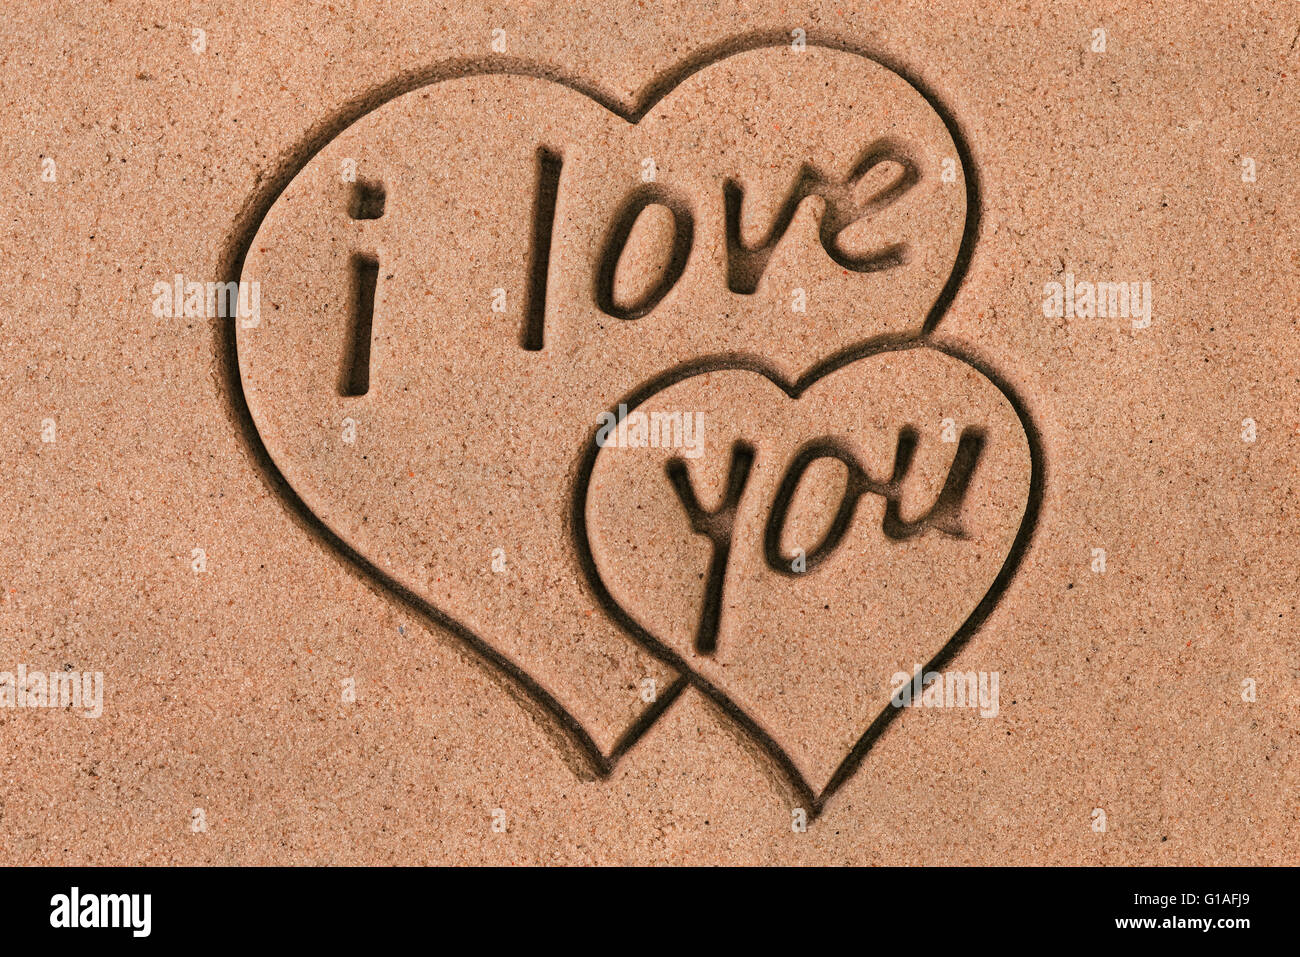 Two Hearts and message I Love You imprint on the sand Stock Photo